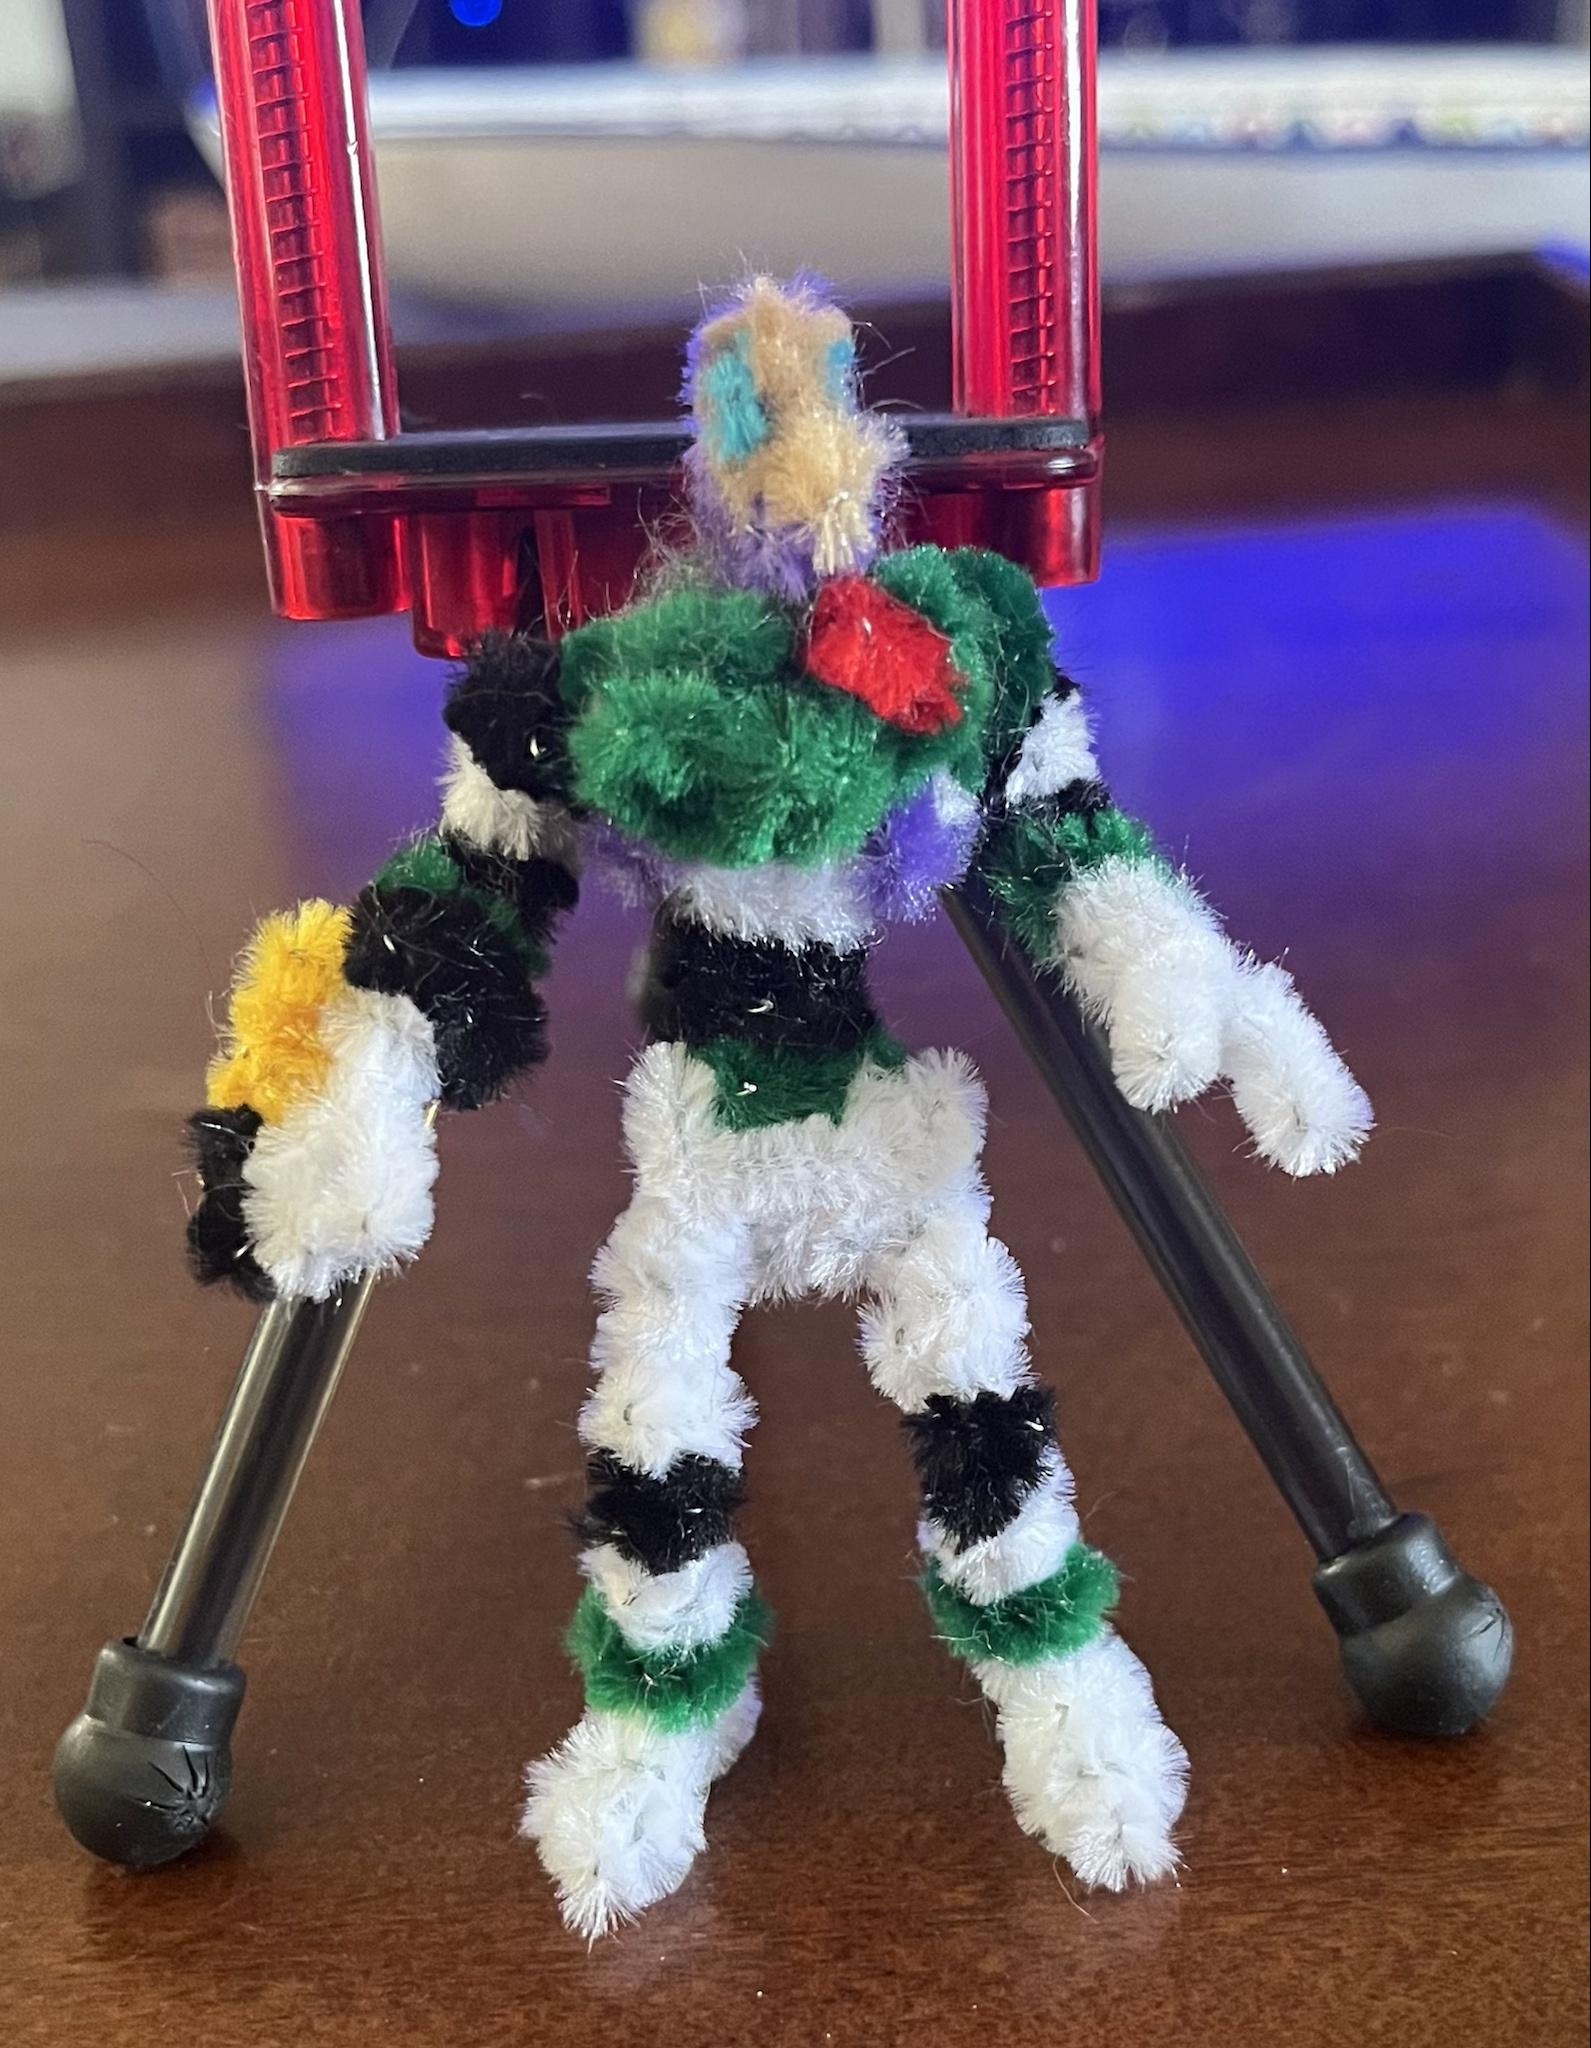 Pipe cleaner Buzz Lightyear (I’m aware he is small)